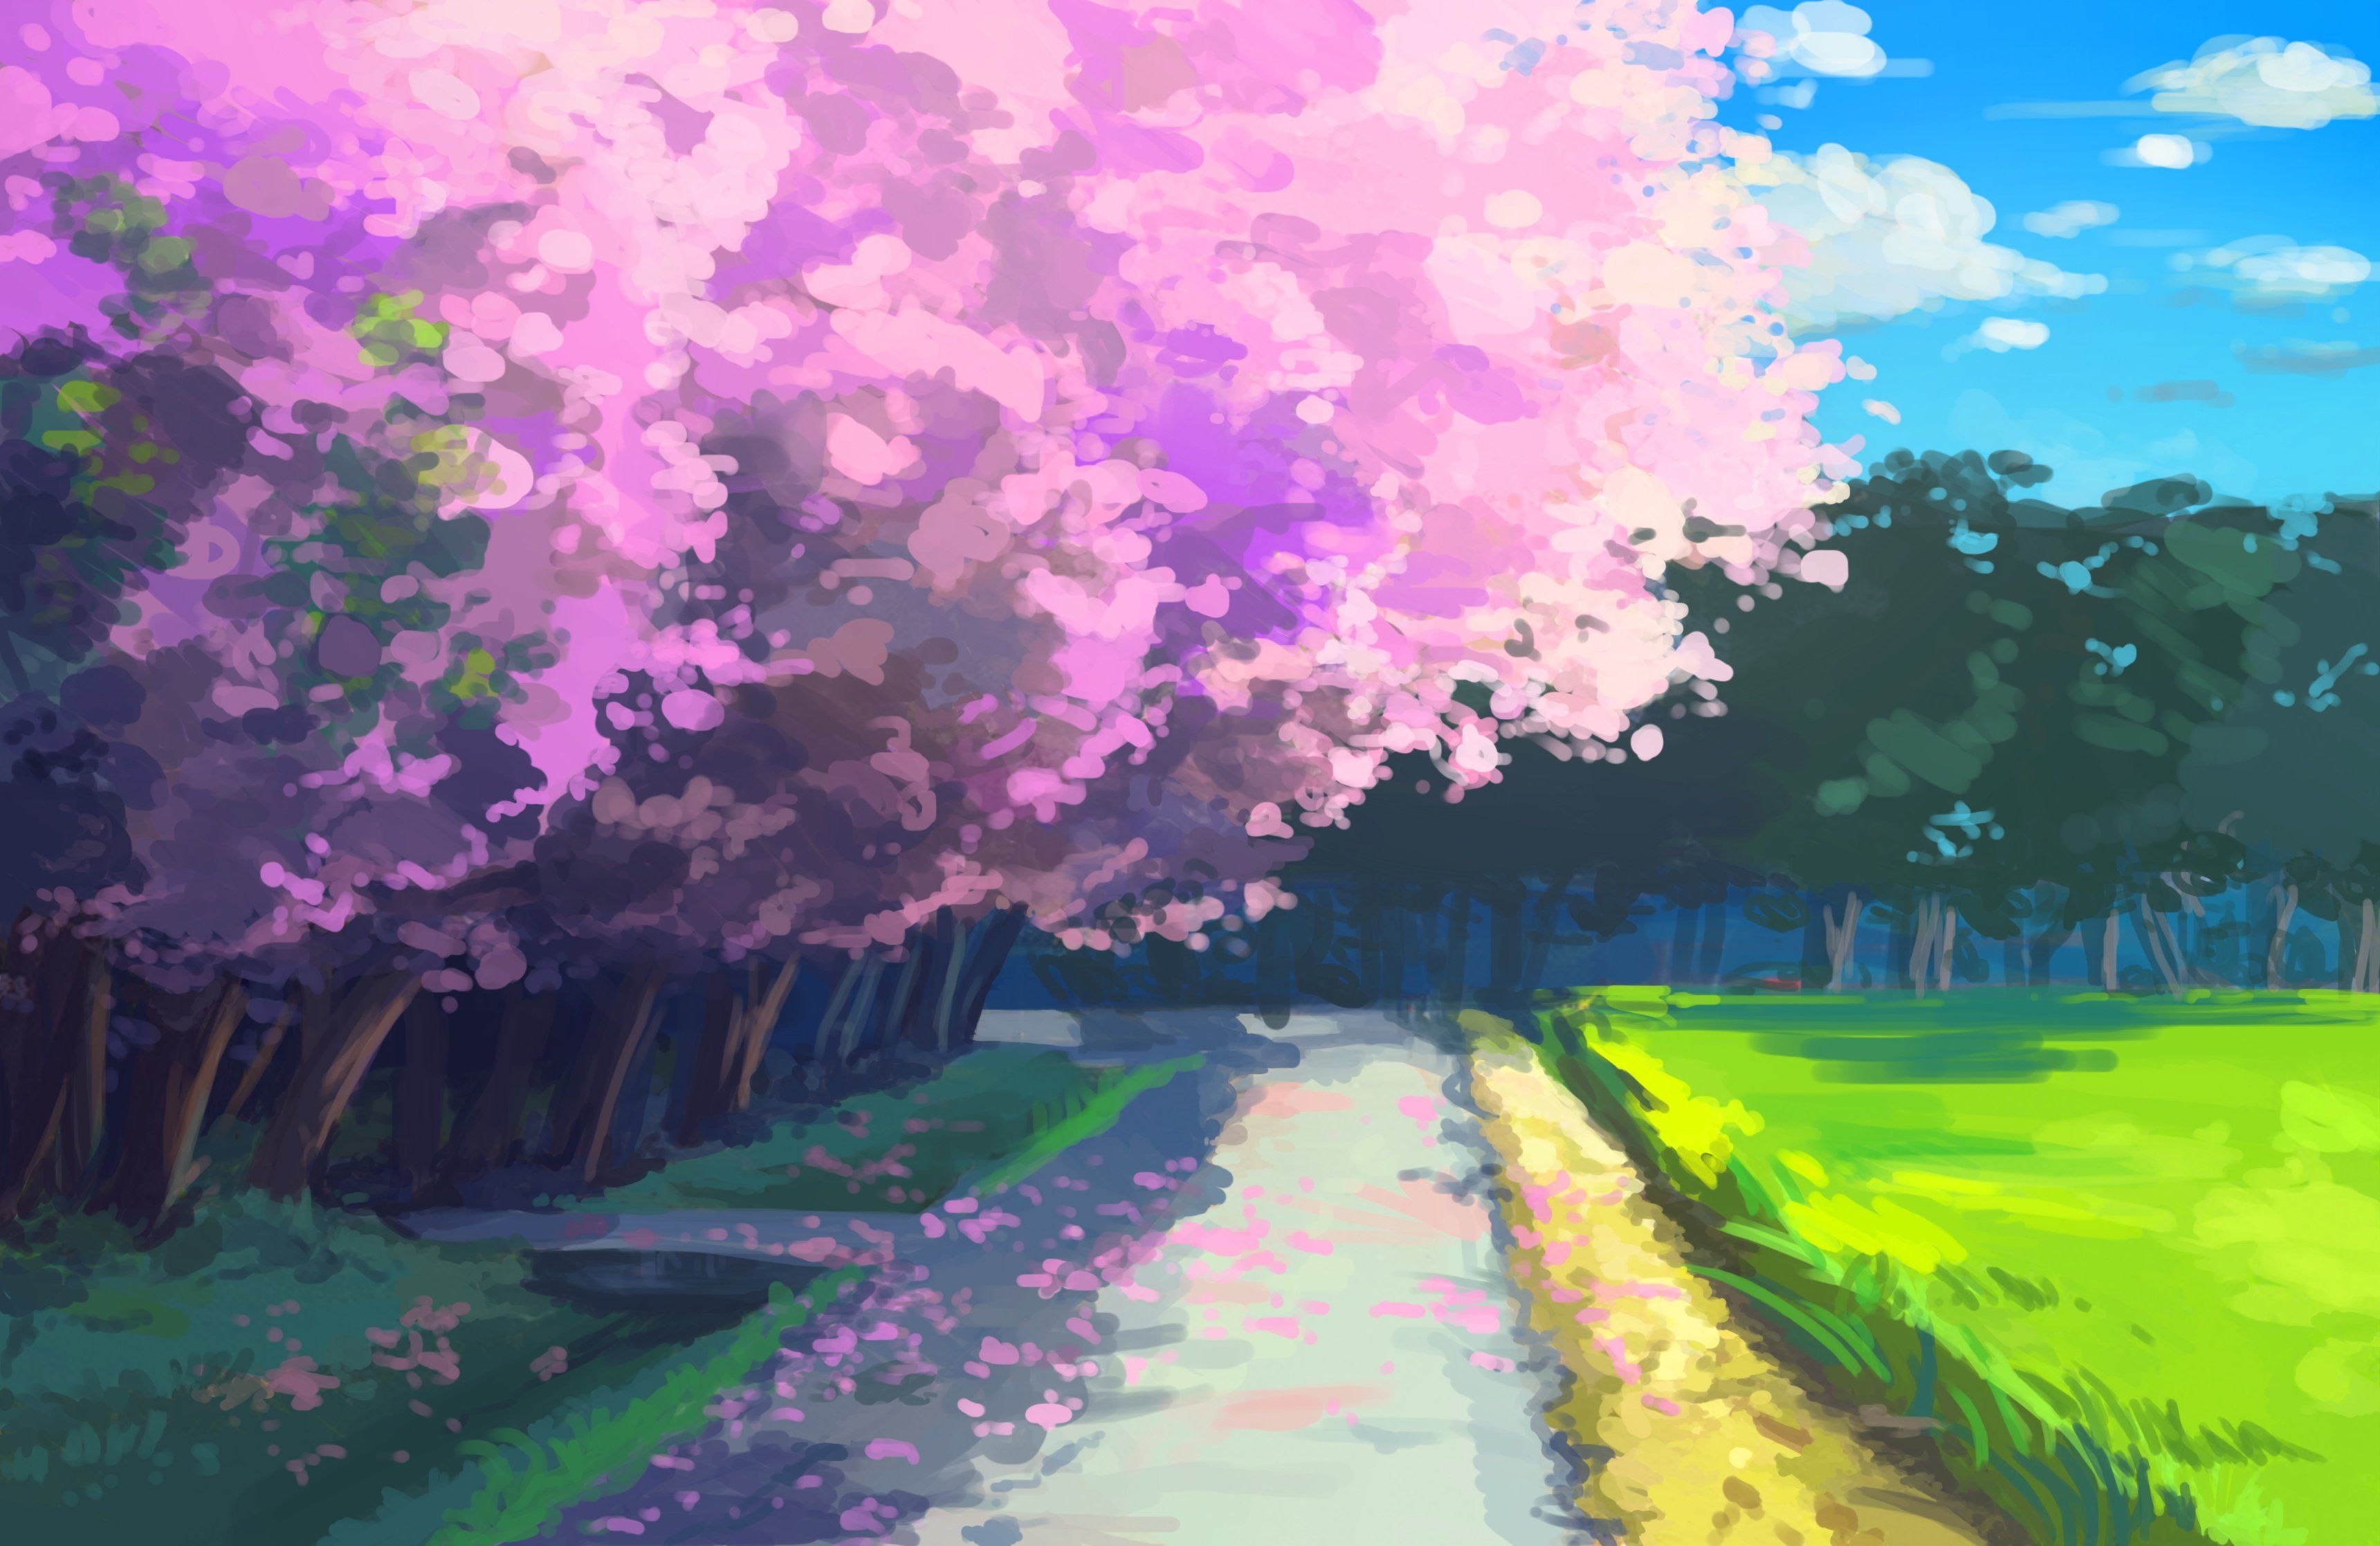 Anime Cherry Blossom Landscape Wallpapers - Wallpaper Cave